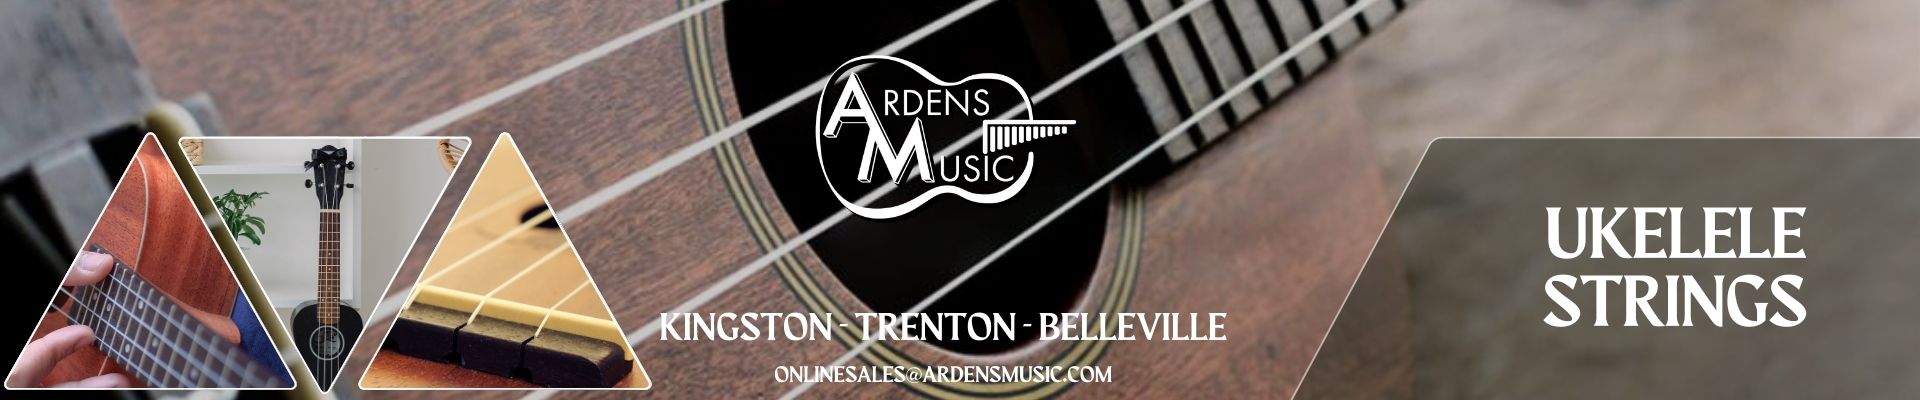 Did you know we offer a restring service? swing by your local Ardens Music with a set of strings or drop by and purchase a set and we will restring your guitar for just $10!